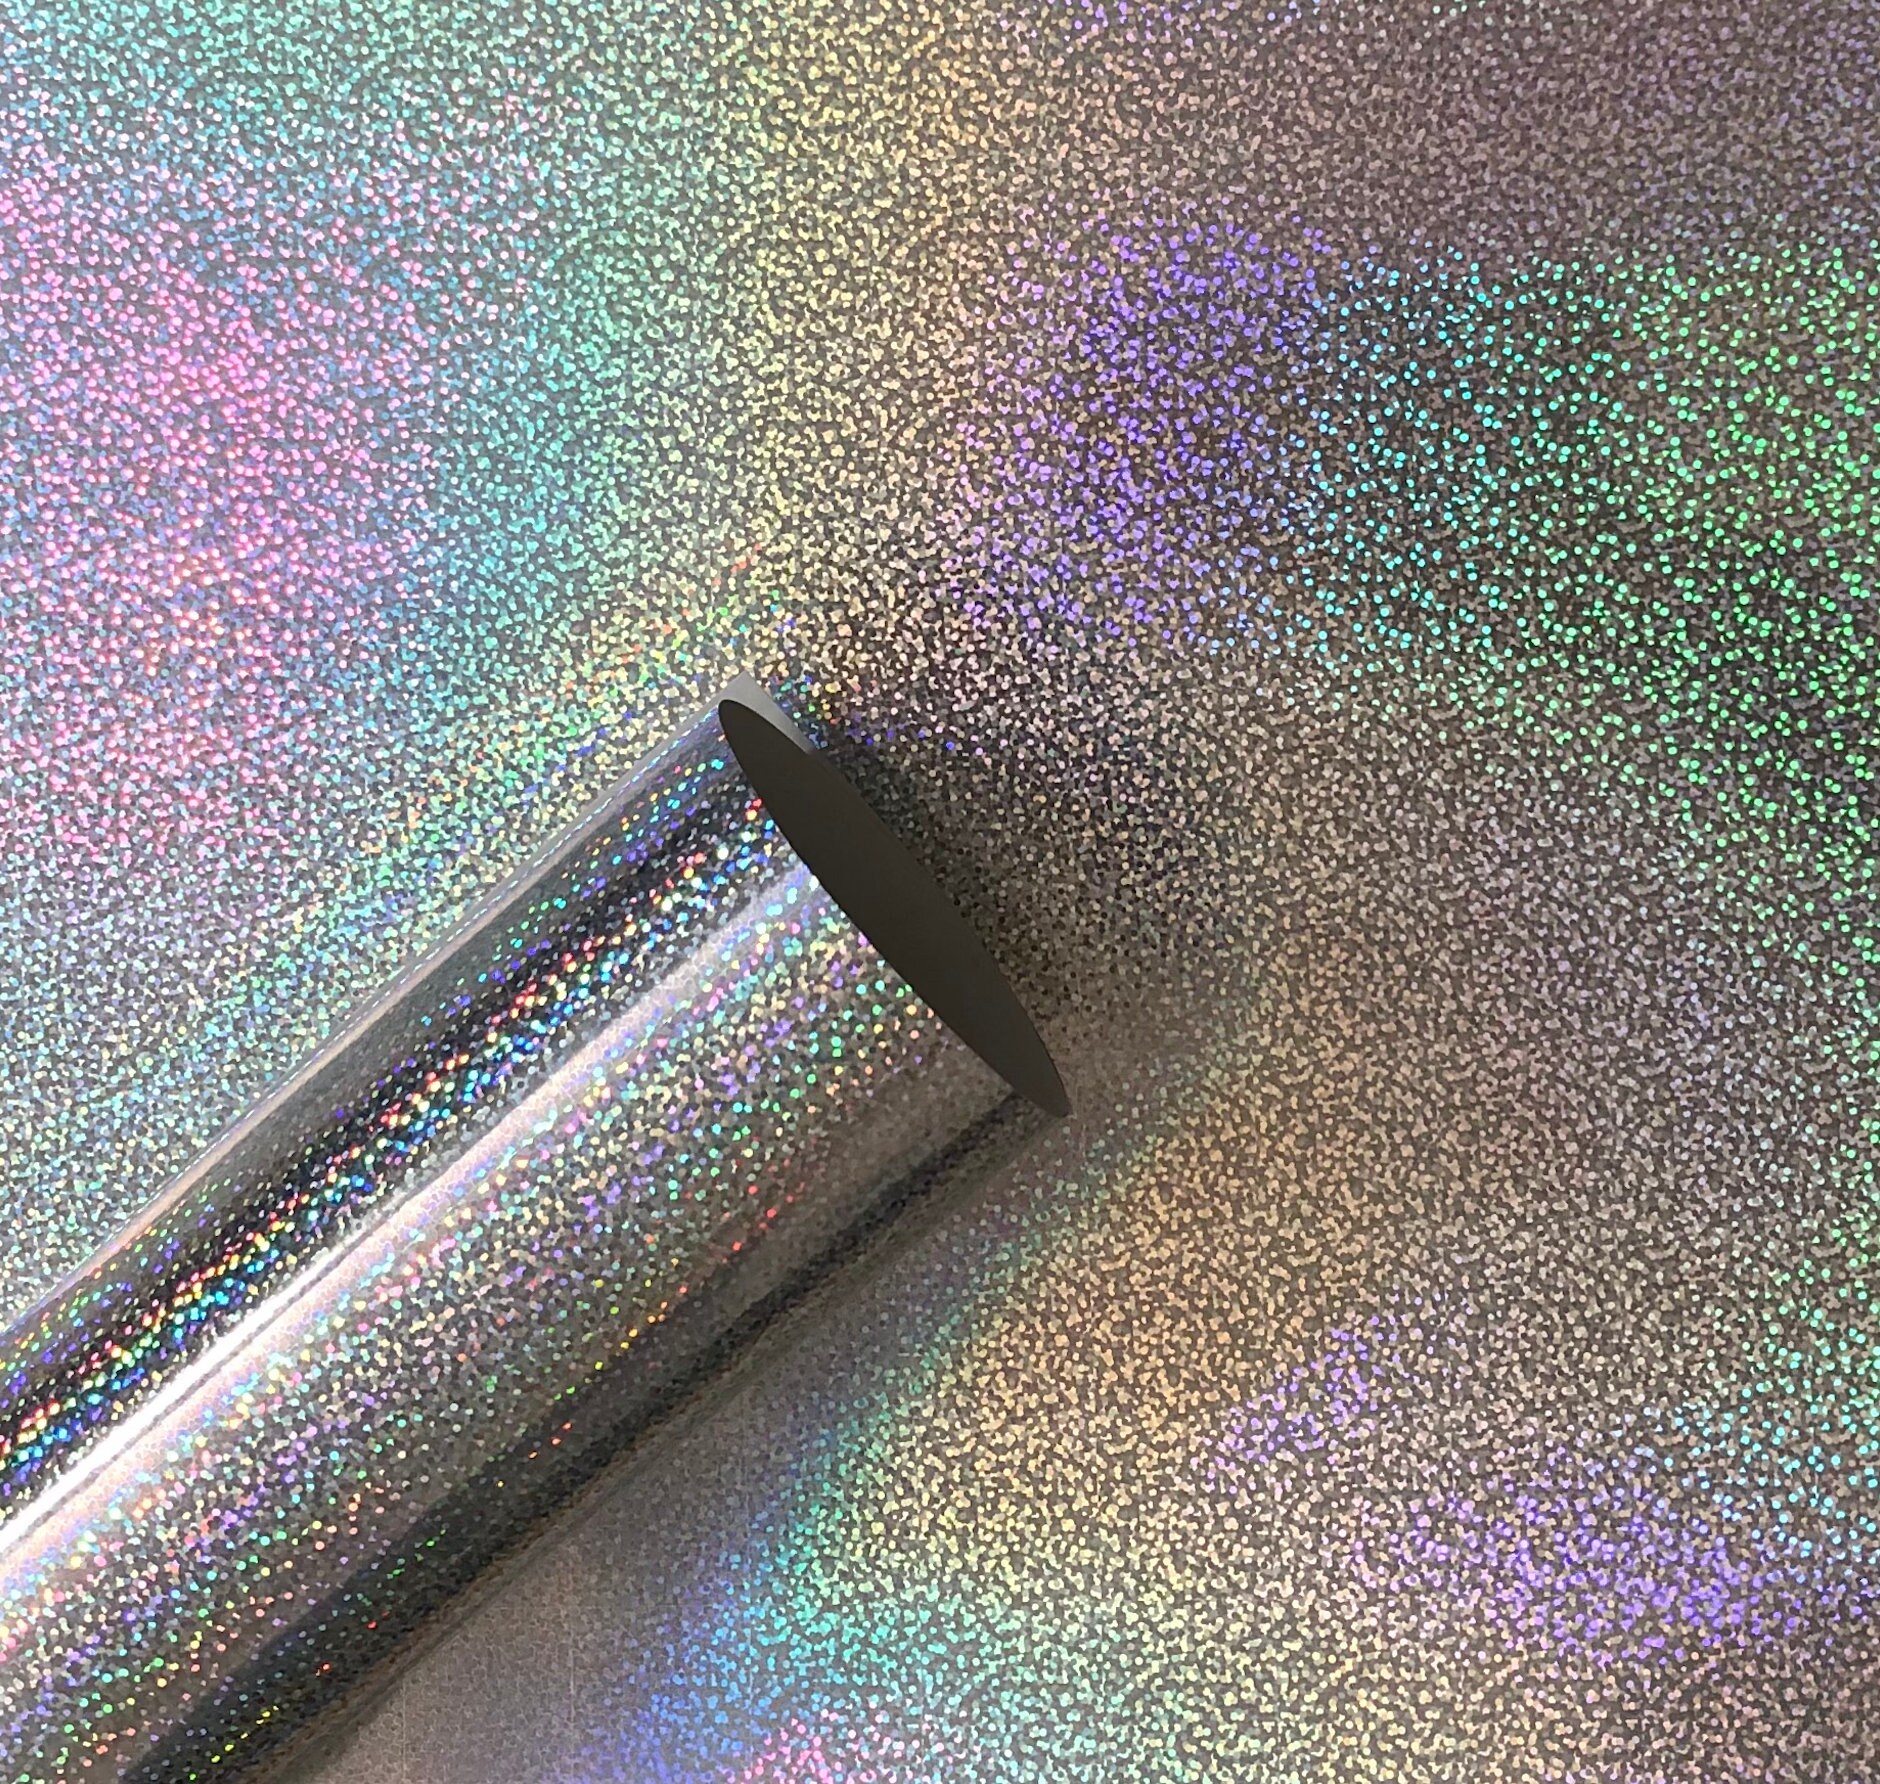 12 X 12 Permanent Adhesive Vinyl Sheets Fantasy Sequin Holographic Glitter  for Cricut, Silhouette Cameo, Craft Cutters Etc. 